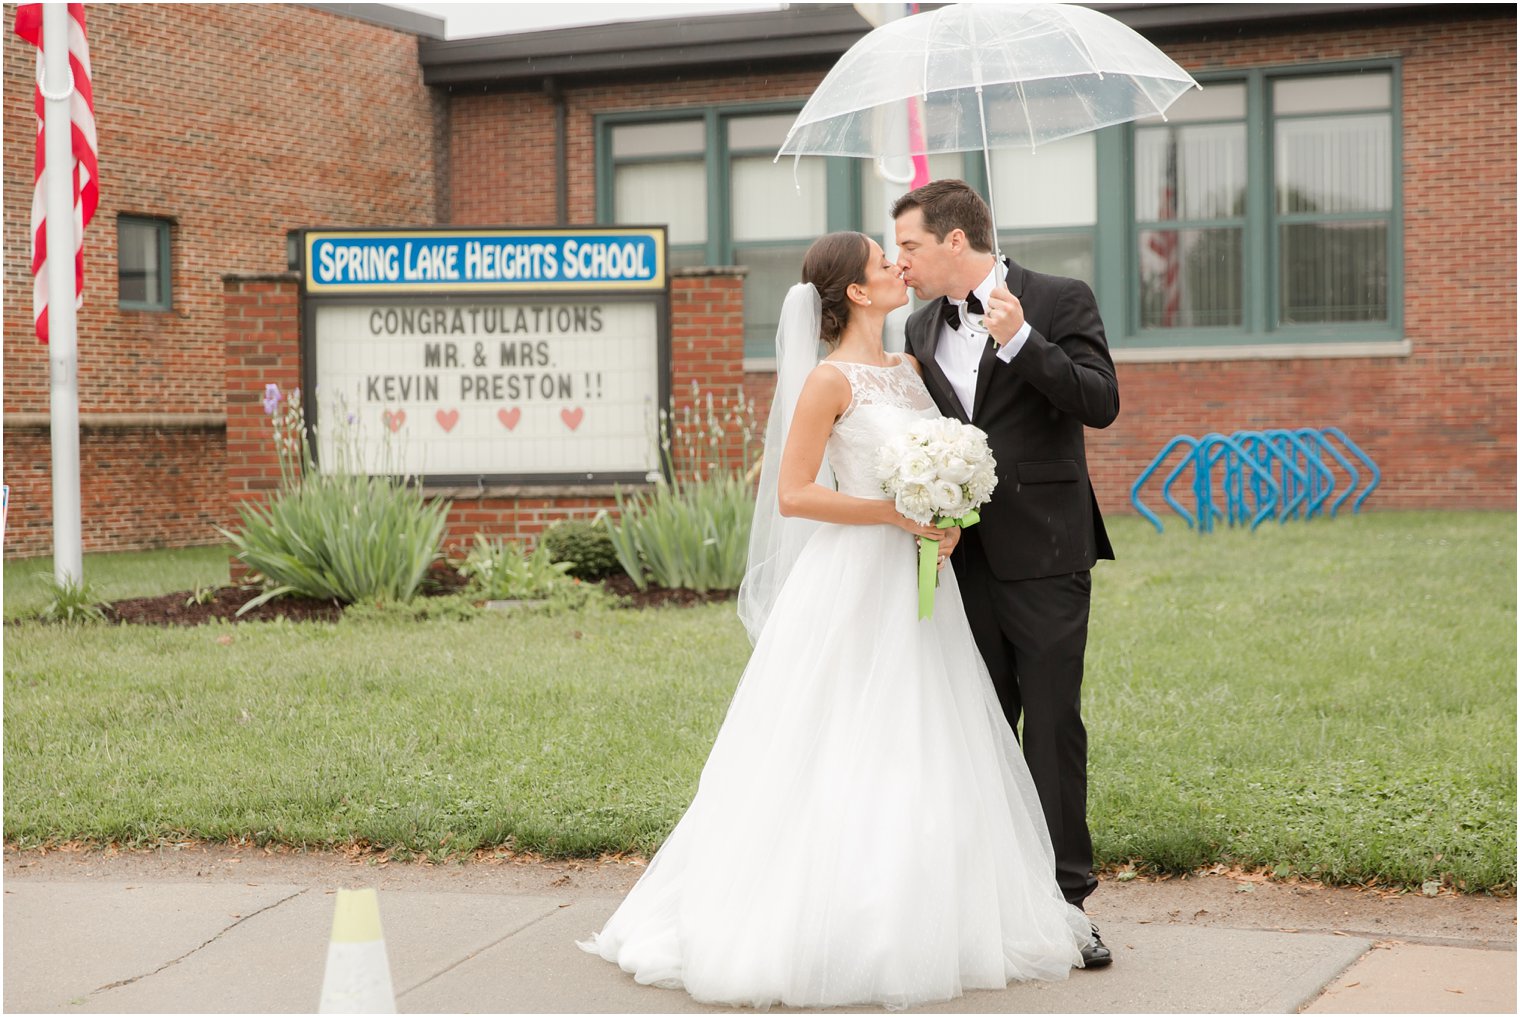 wedding photo in front of a school